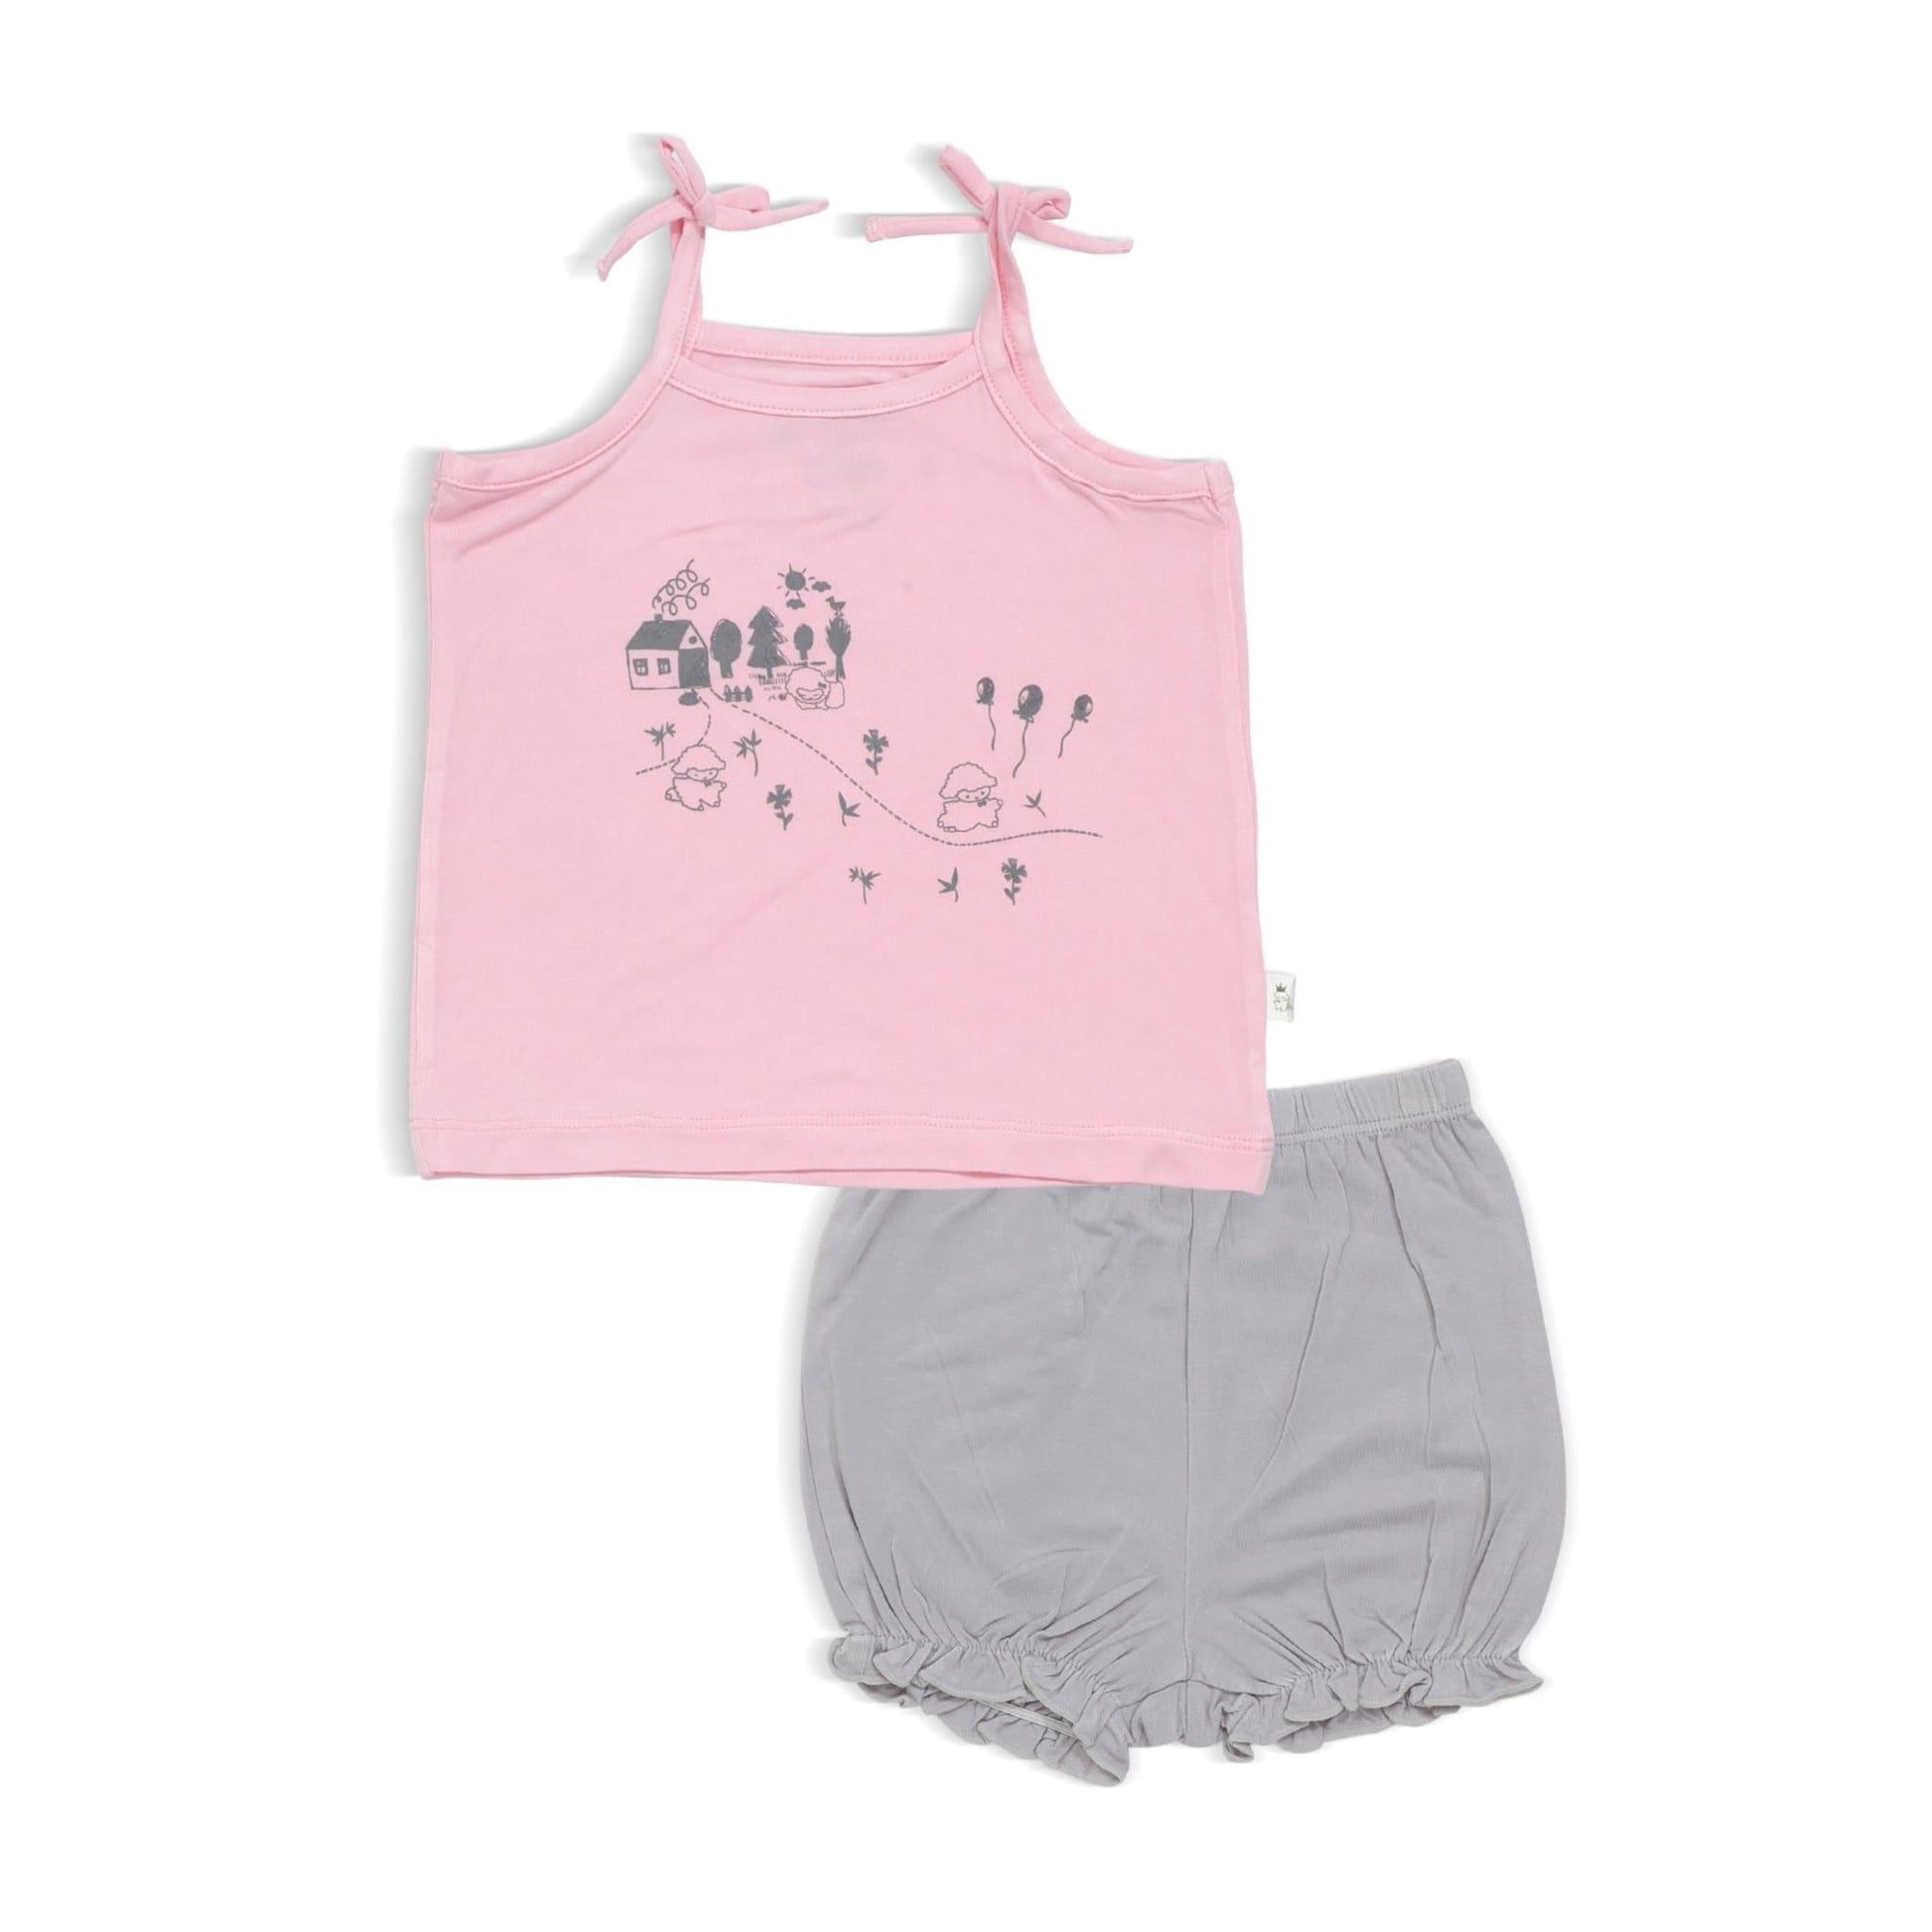 Adorable Lamb - Blouse with Spaghetti Tie & Bloomer Shorts (2-pc Set) by simplylifebaby